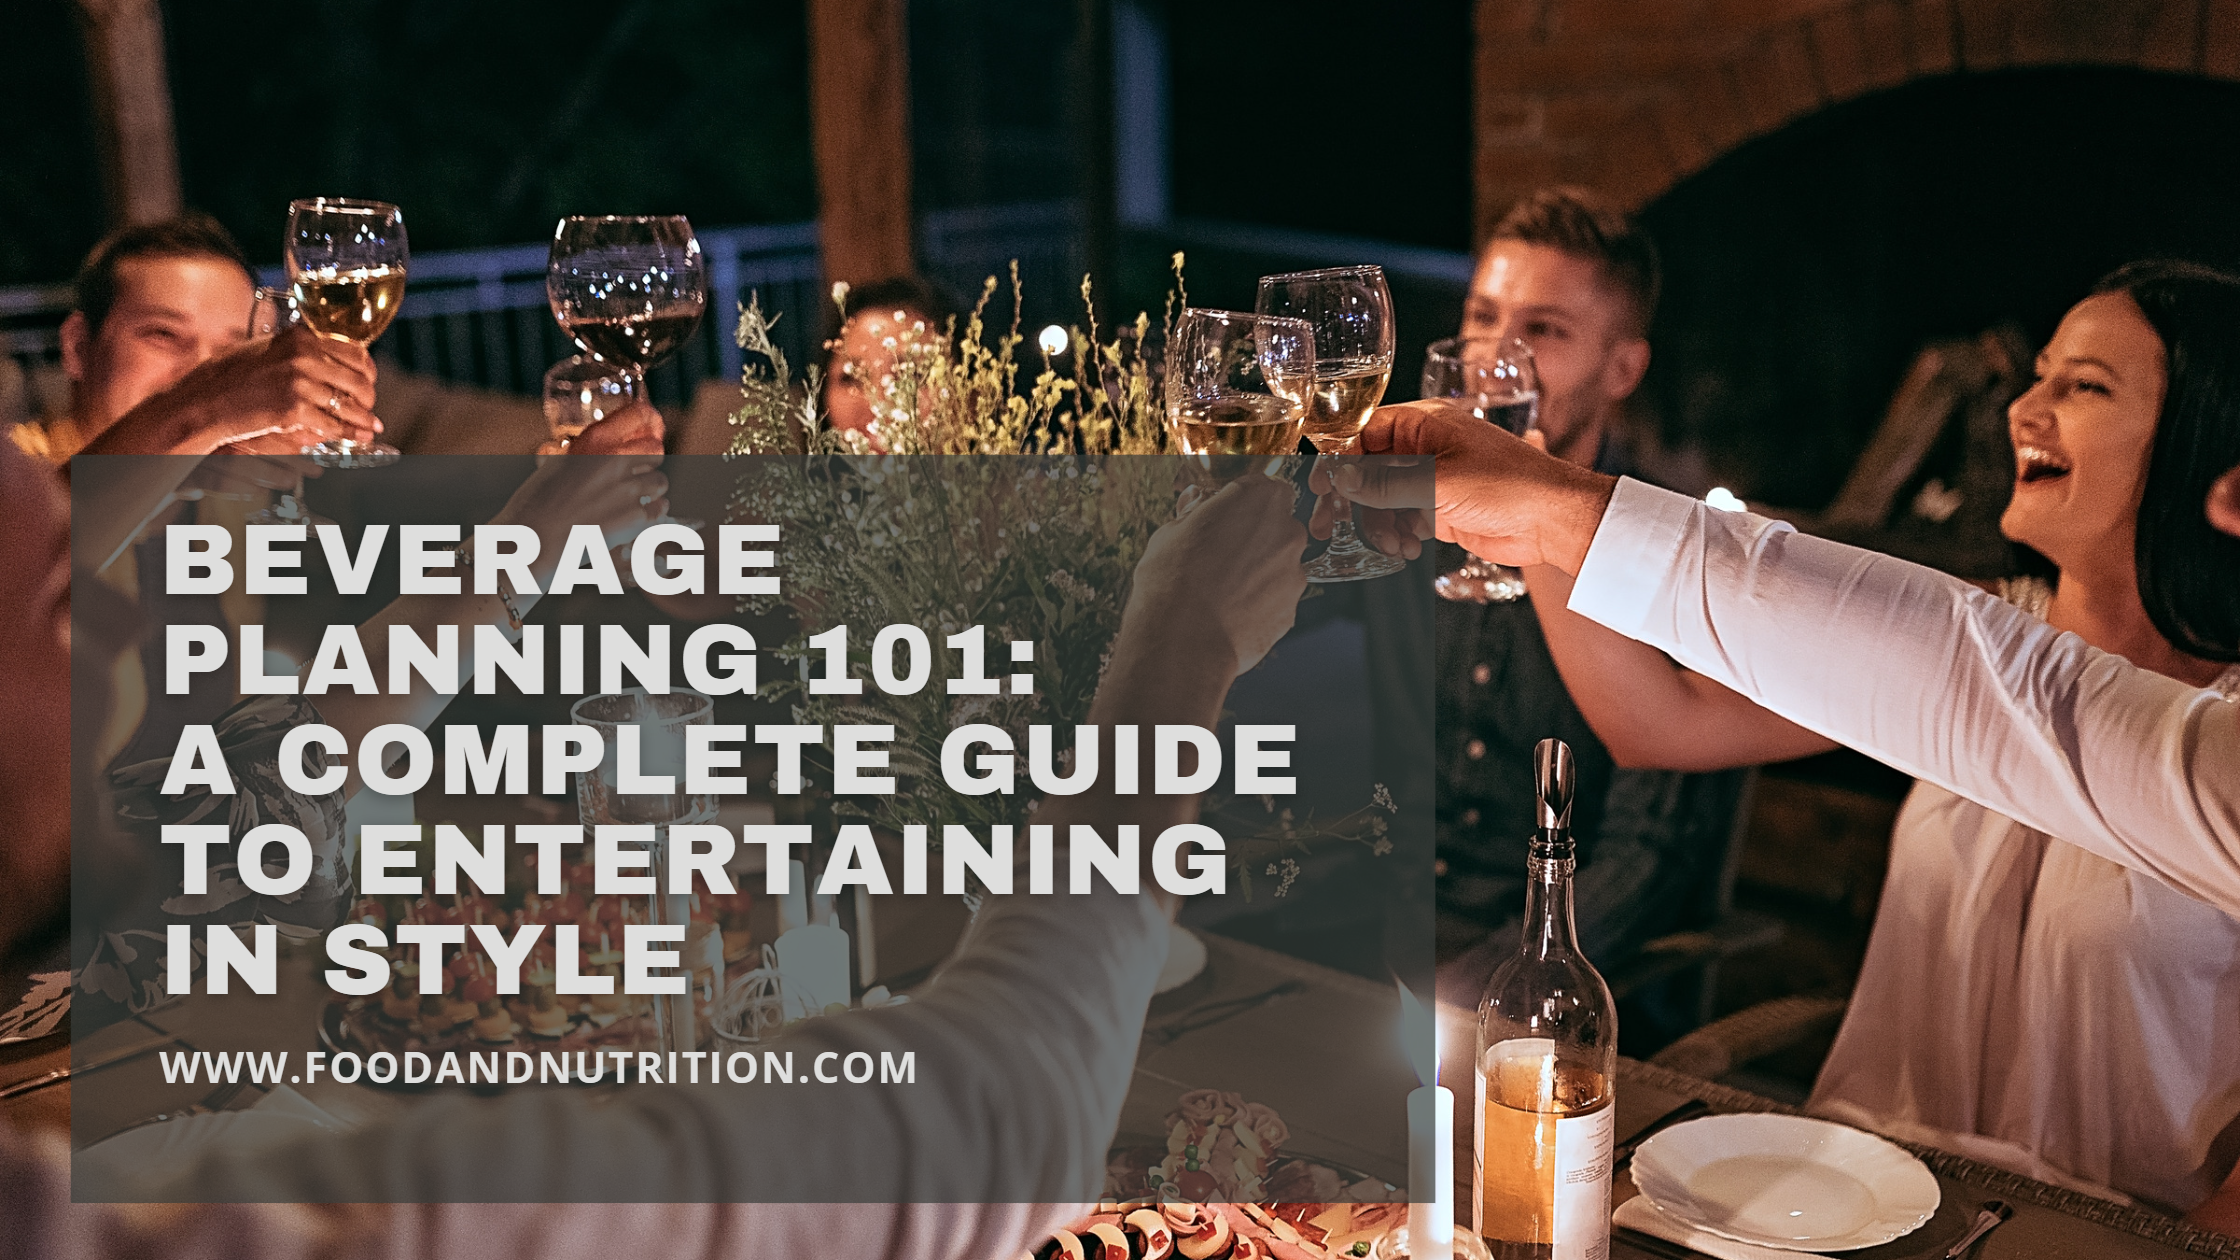 Beverage Planning 101: A Complete Guide to Entertaining in Style